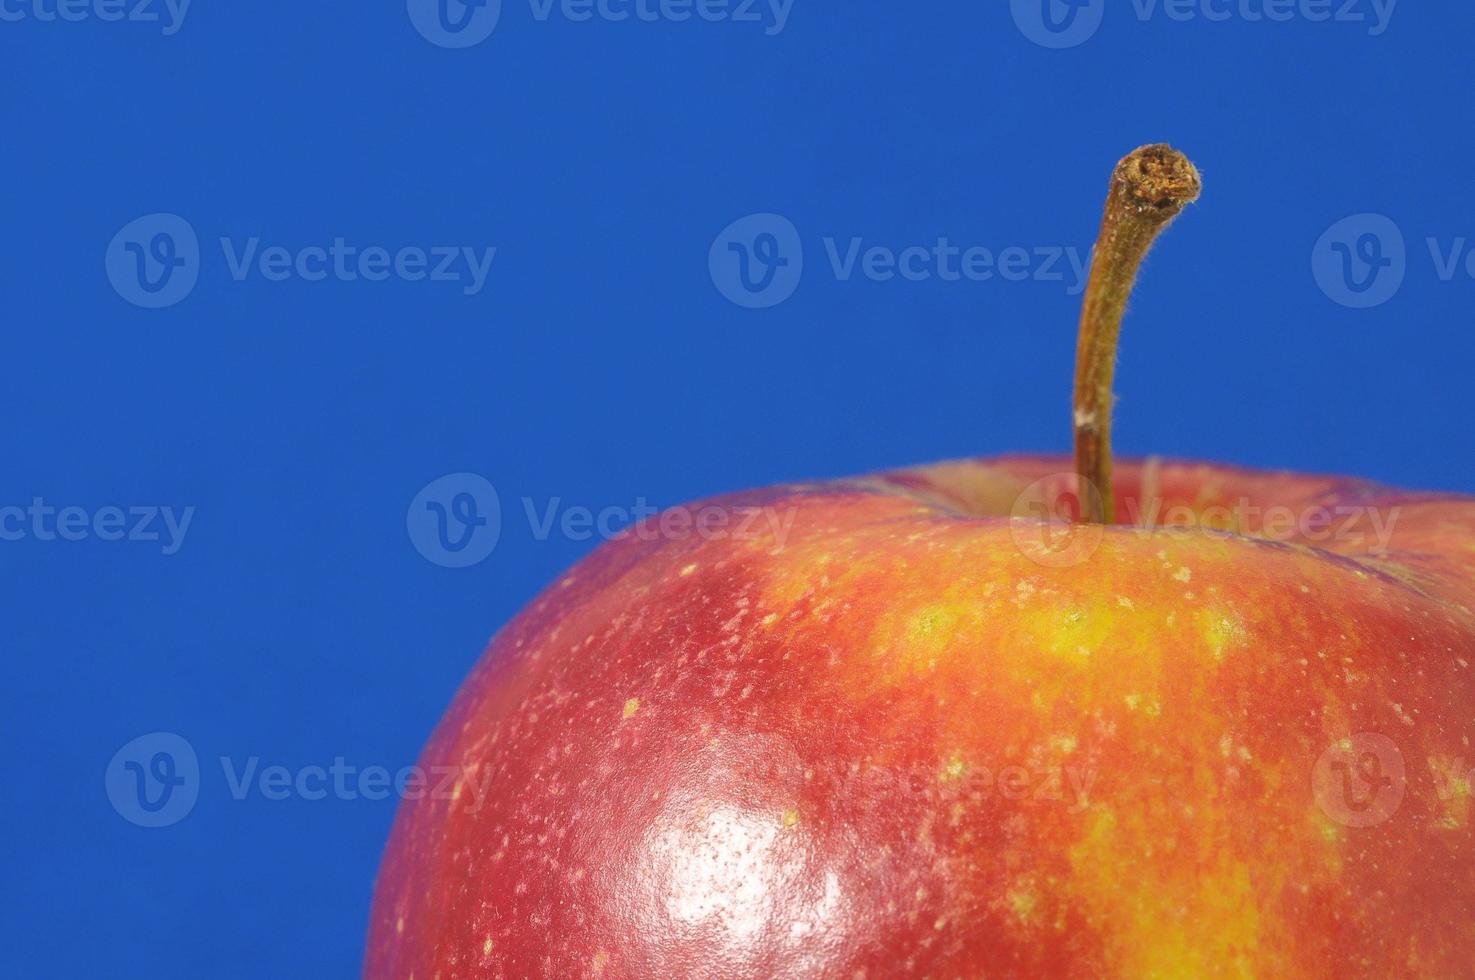 Isolated red apple photo